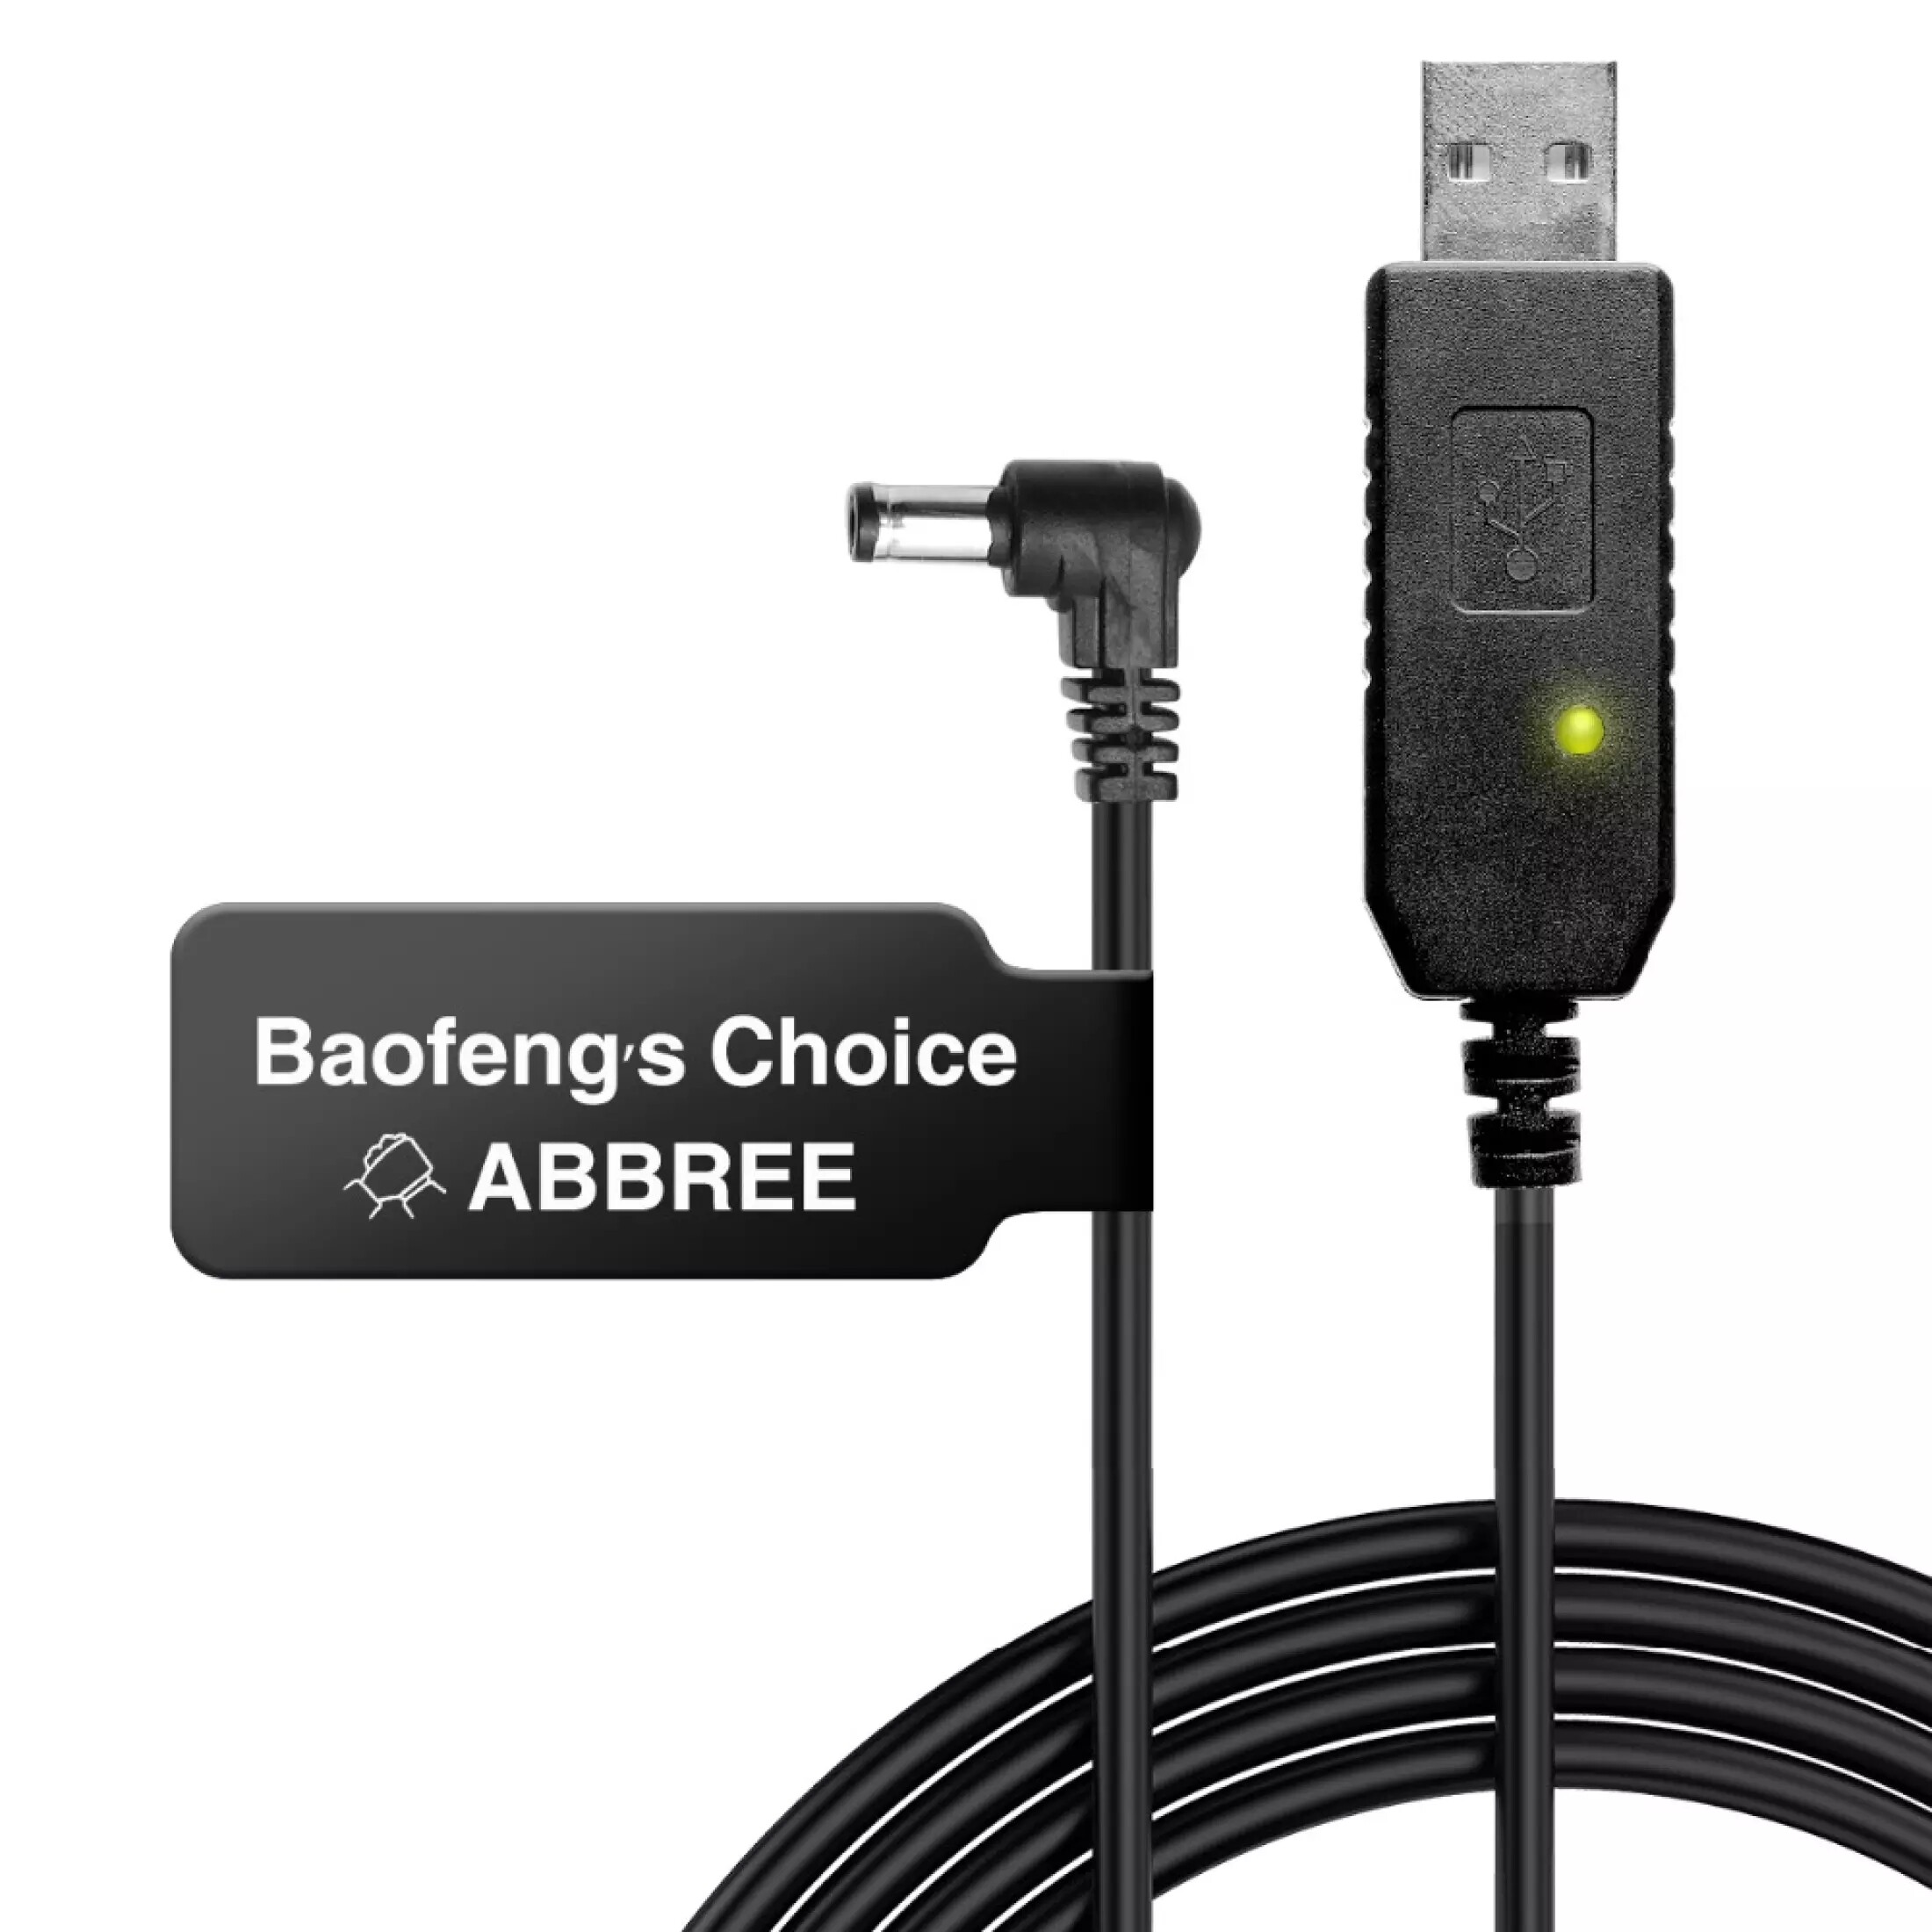 ABBREE 10V Output Car Charger Cable Line for Baofeng UV-5R UV-9R Plus Two Way Radio BF-F8HP UV-82 GT-3 Walkie Talkie 